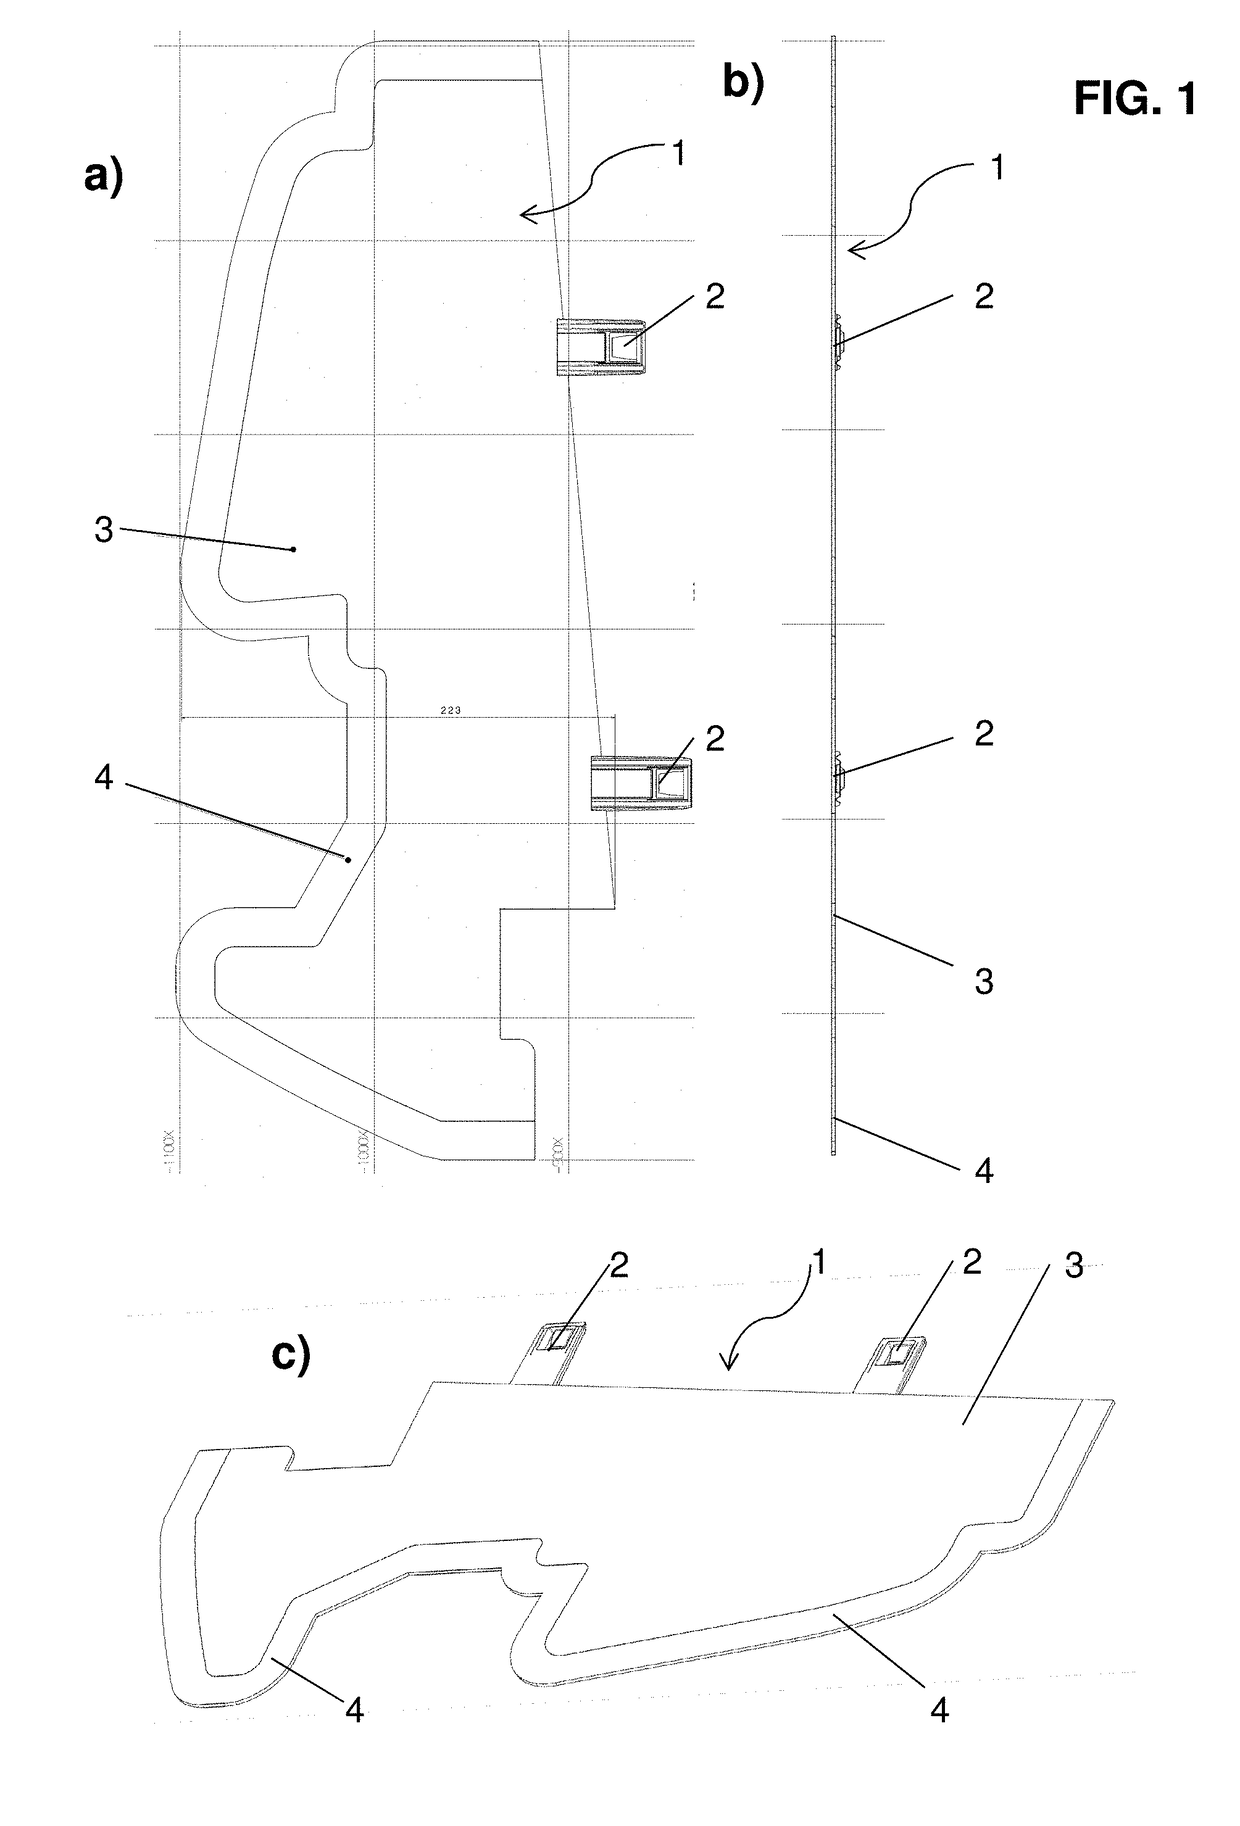 Topologically structured component panel and method for producing the same